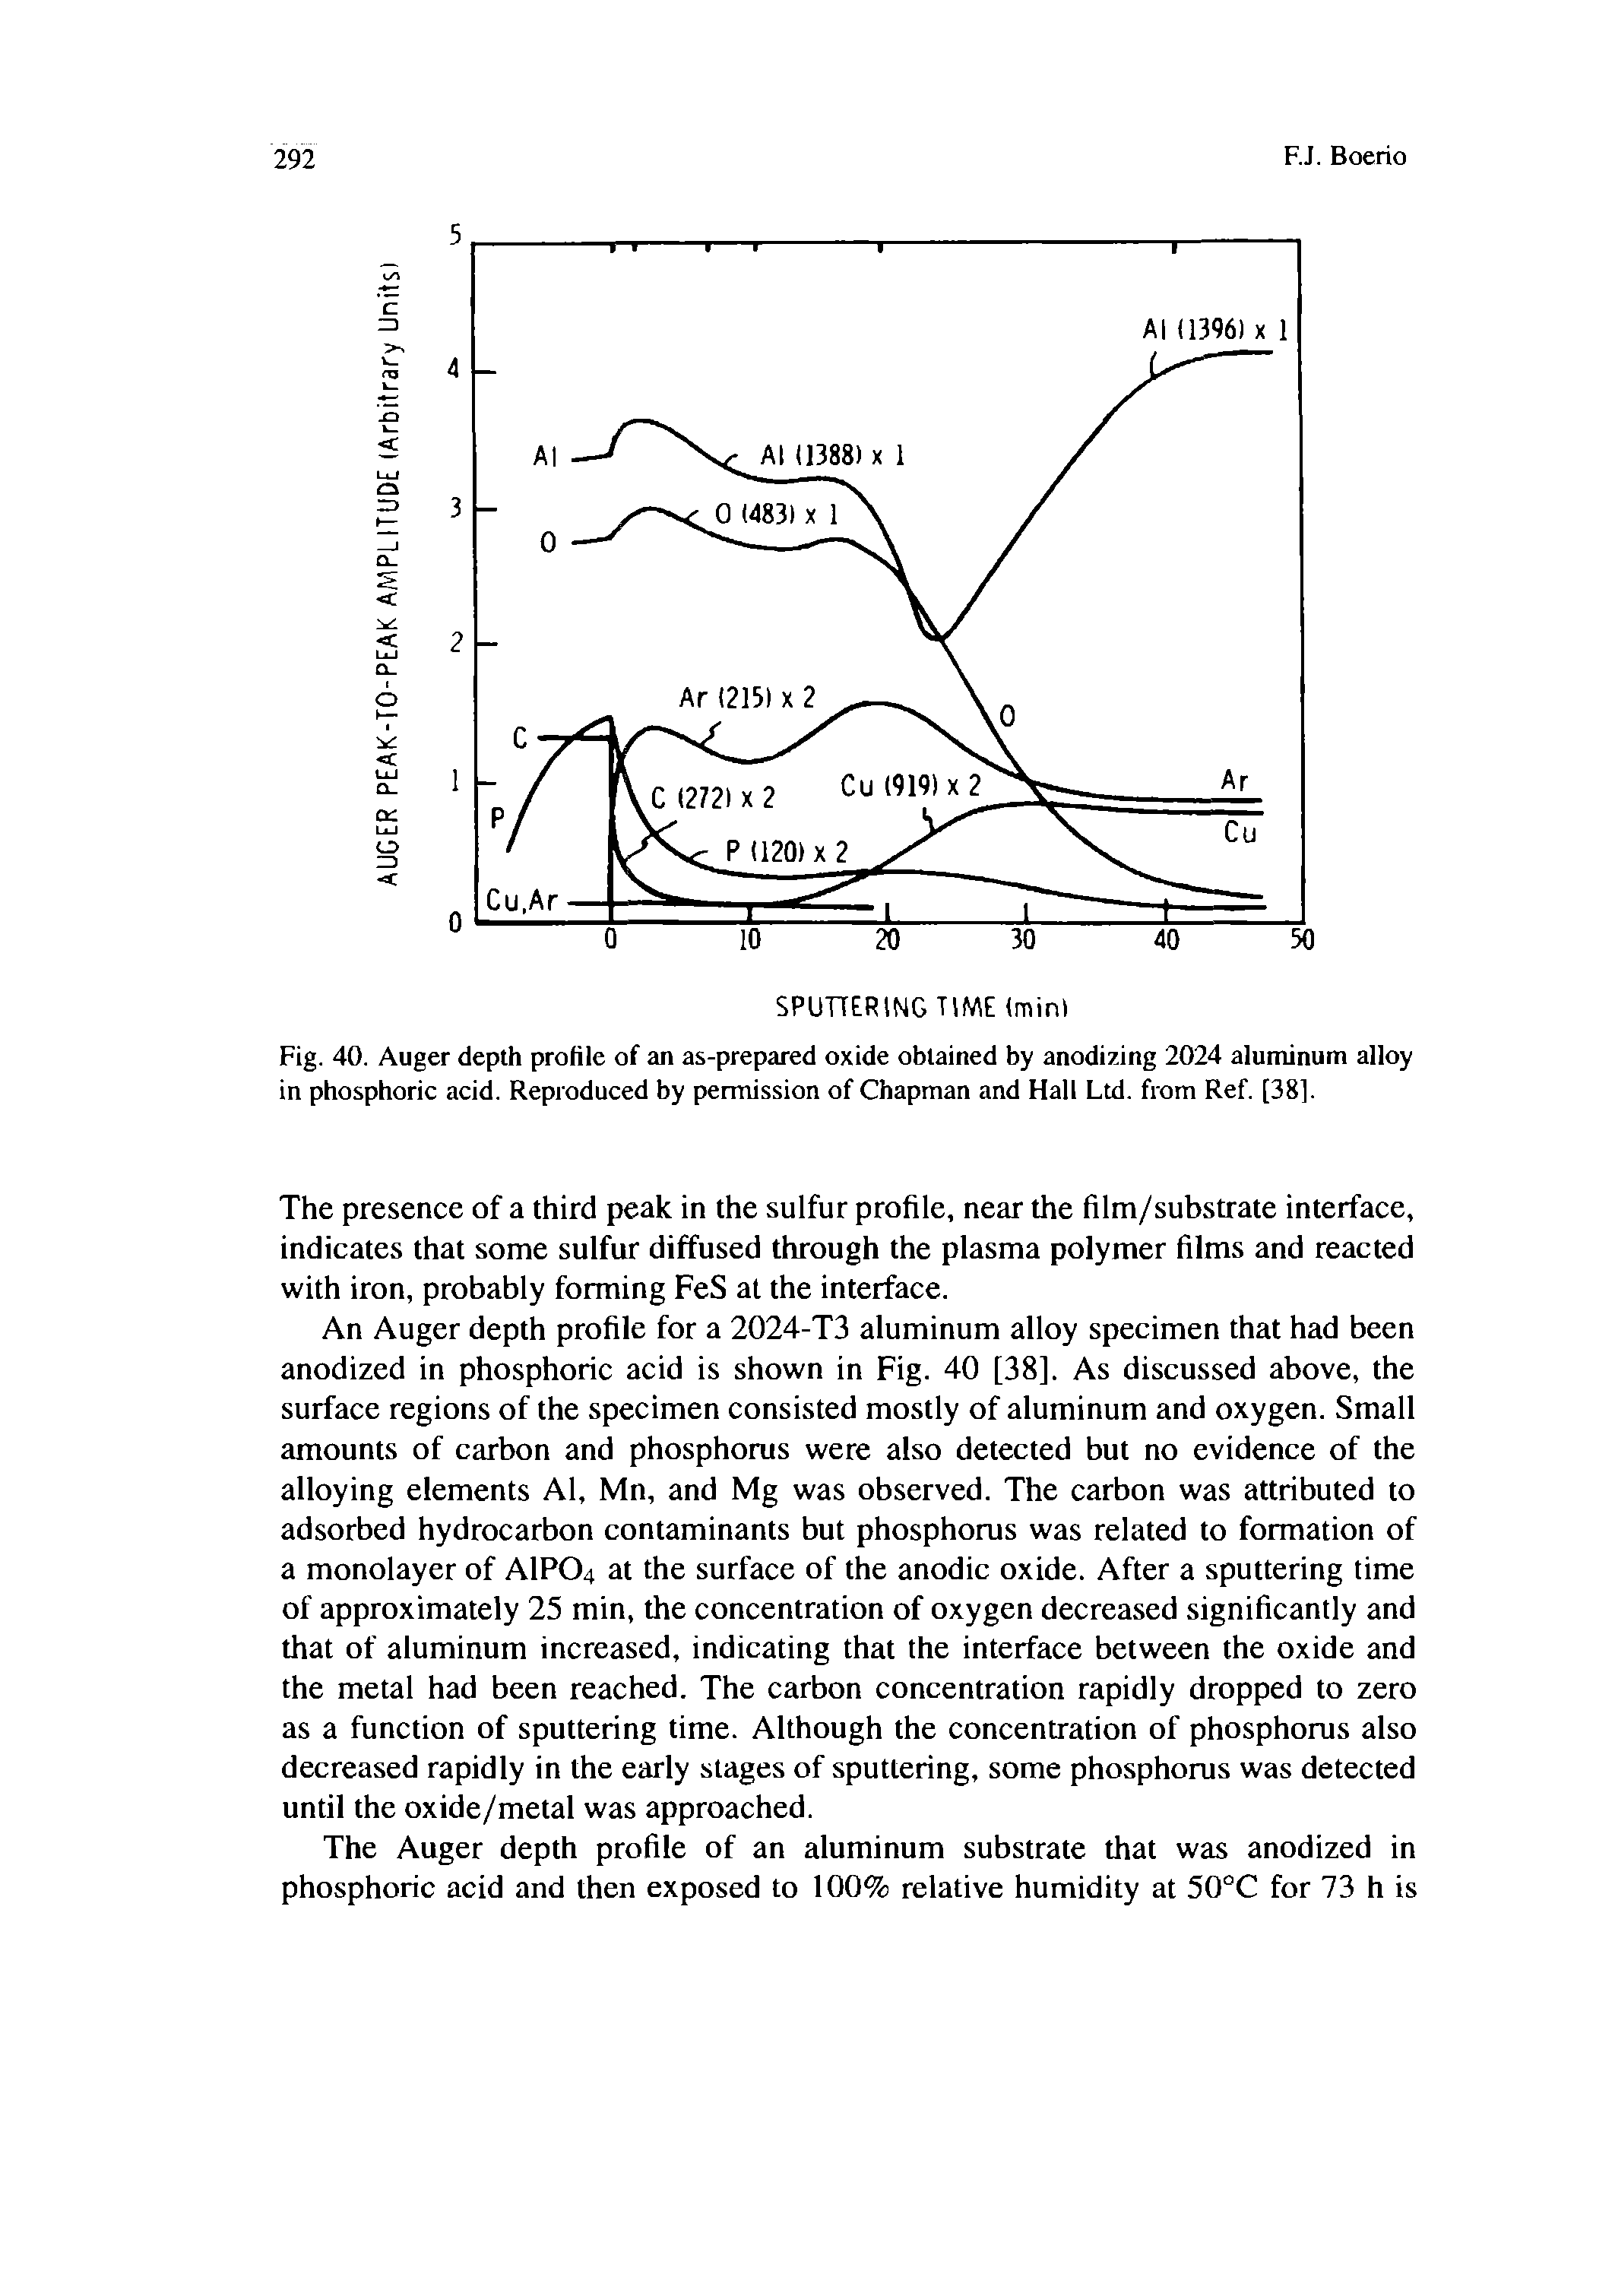 Fig. 40. Auger depth profile of an as-prepared oxide obtained by anodizing 2024 aluminum alloy in phosphoric acid. Reproduced by permission of Chapman and Hall Ltd. from Ref. [38].